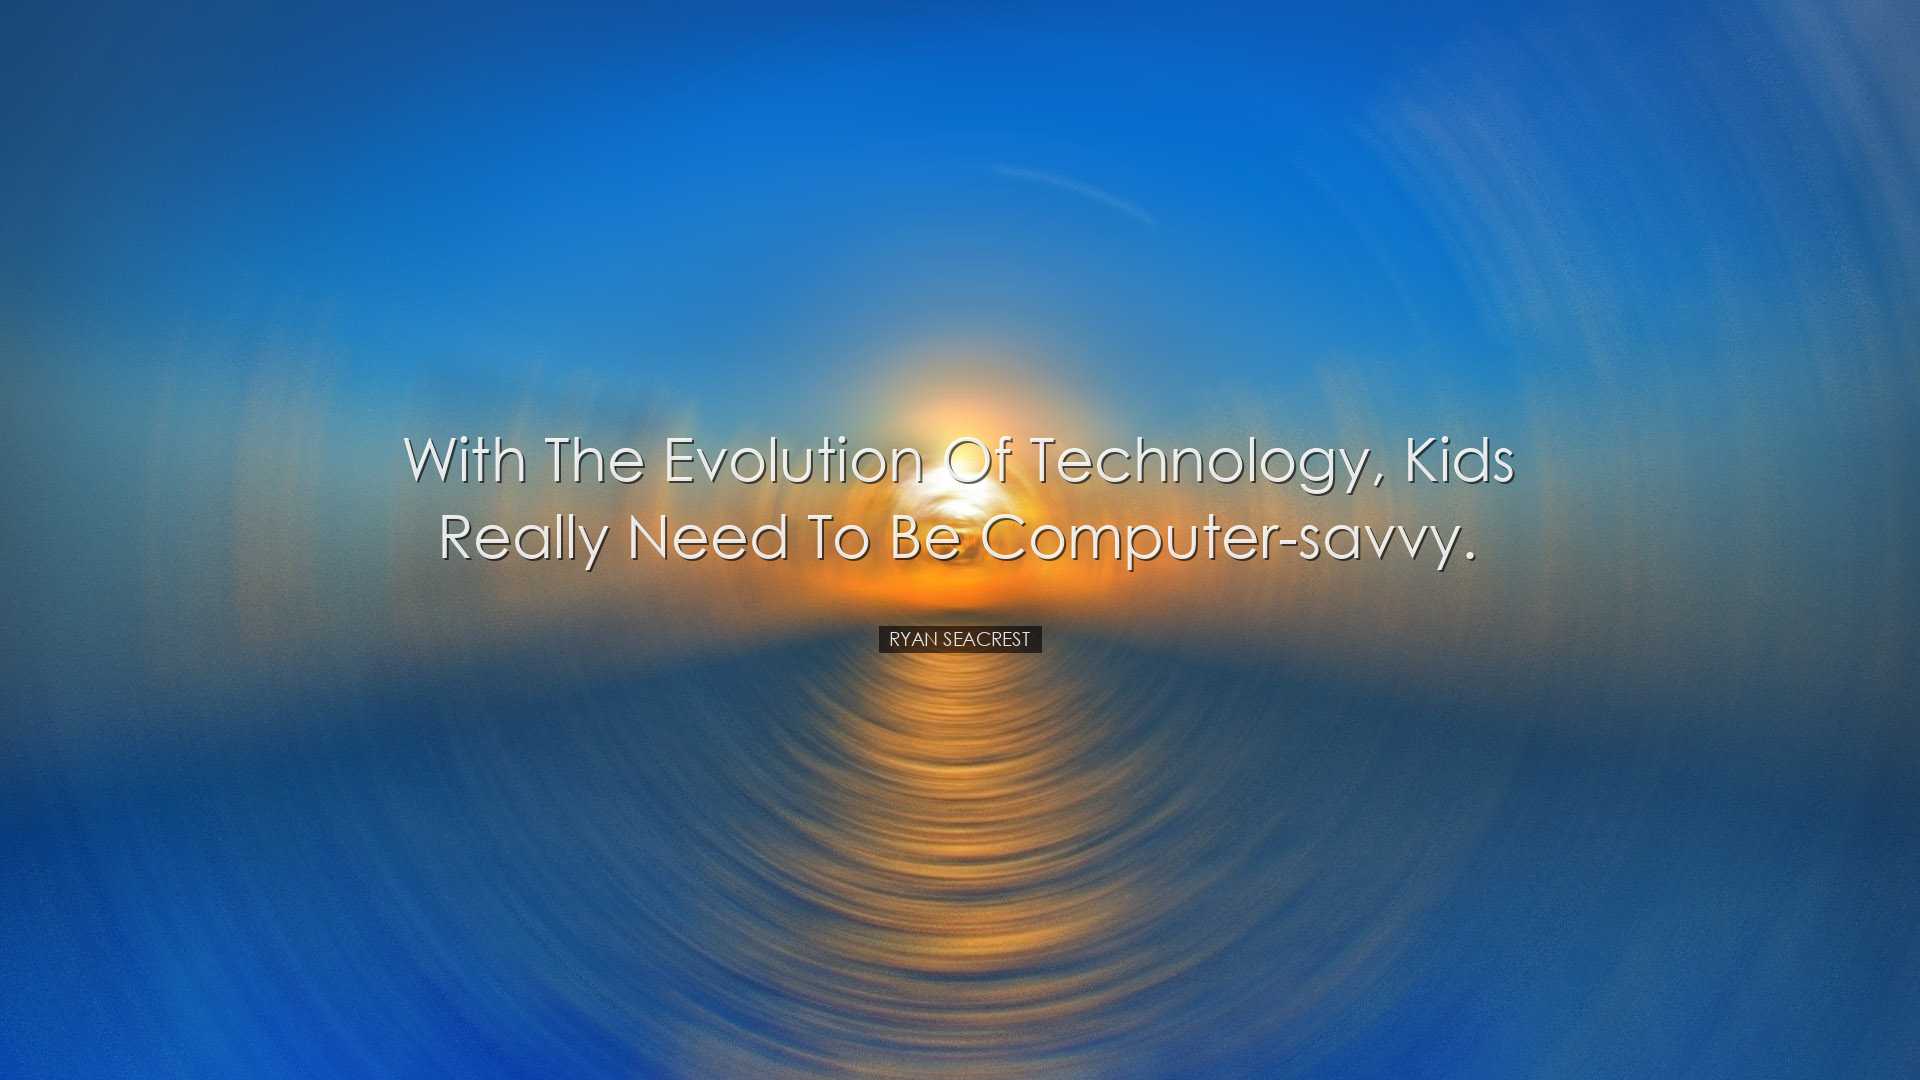 With the evolution of technology, kids really need to be computer-